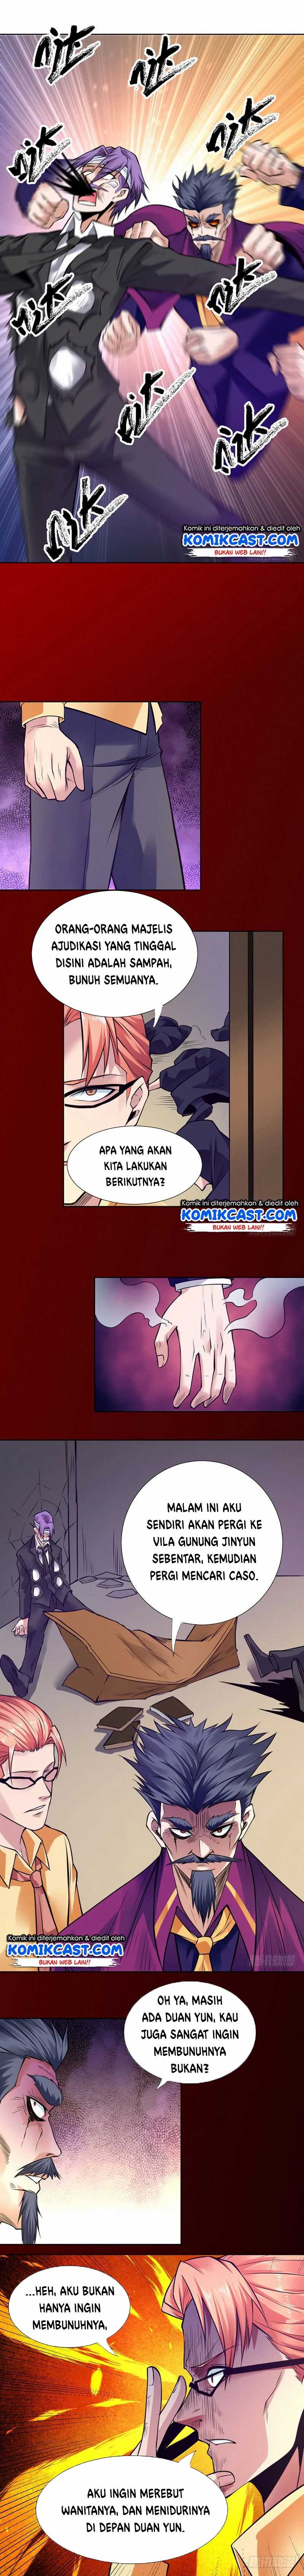 First Rate Master Chapter 89